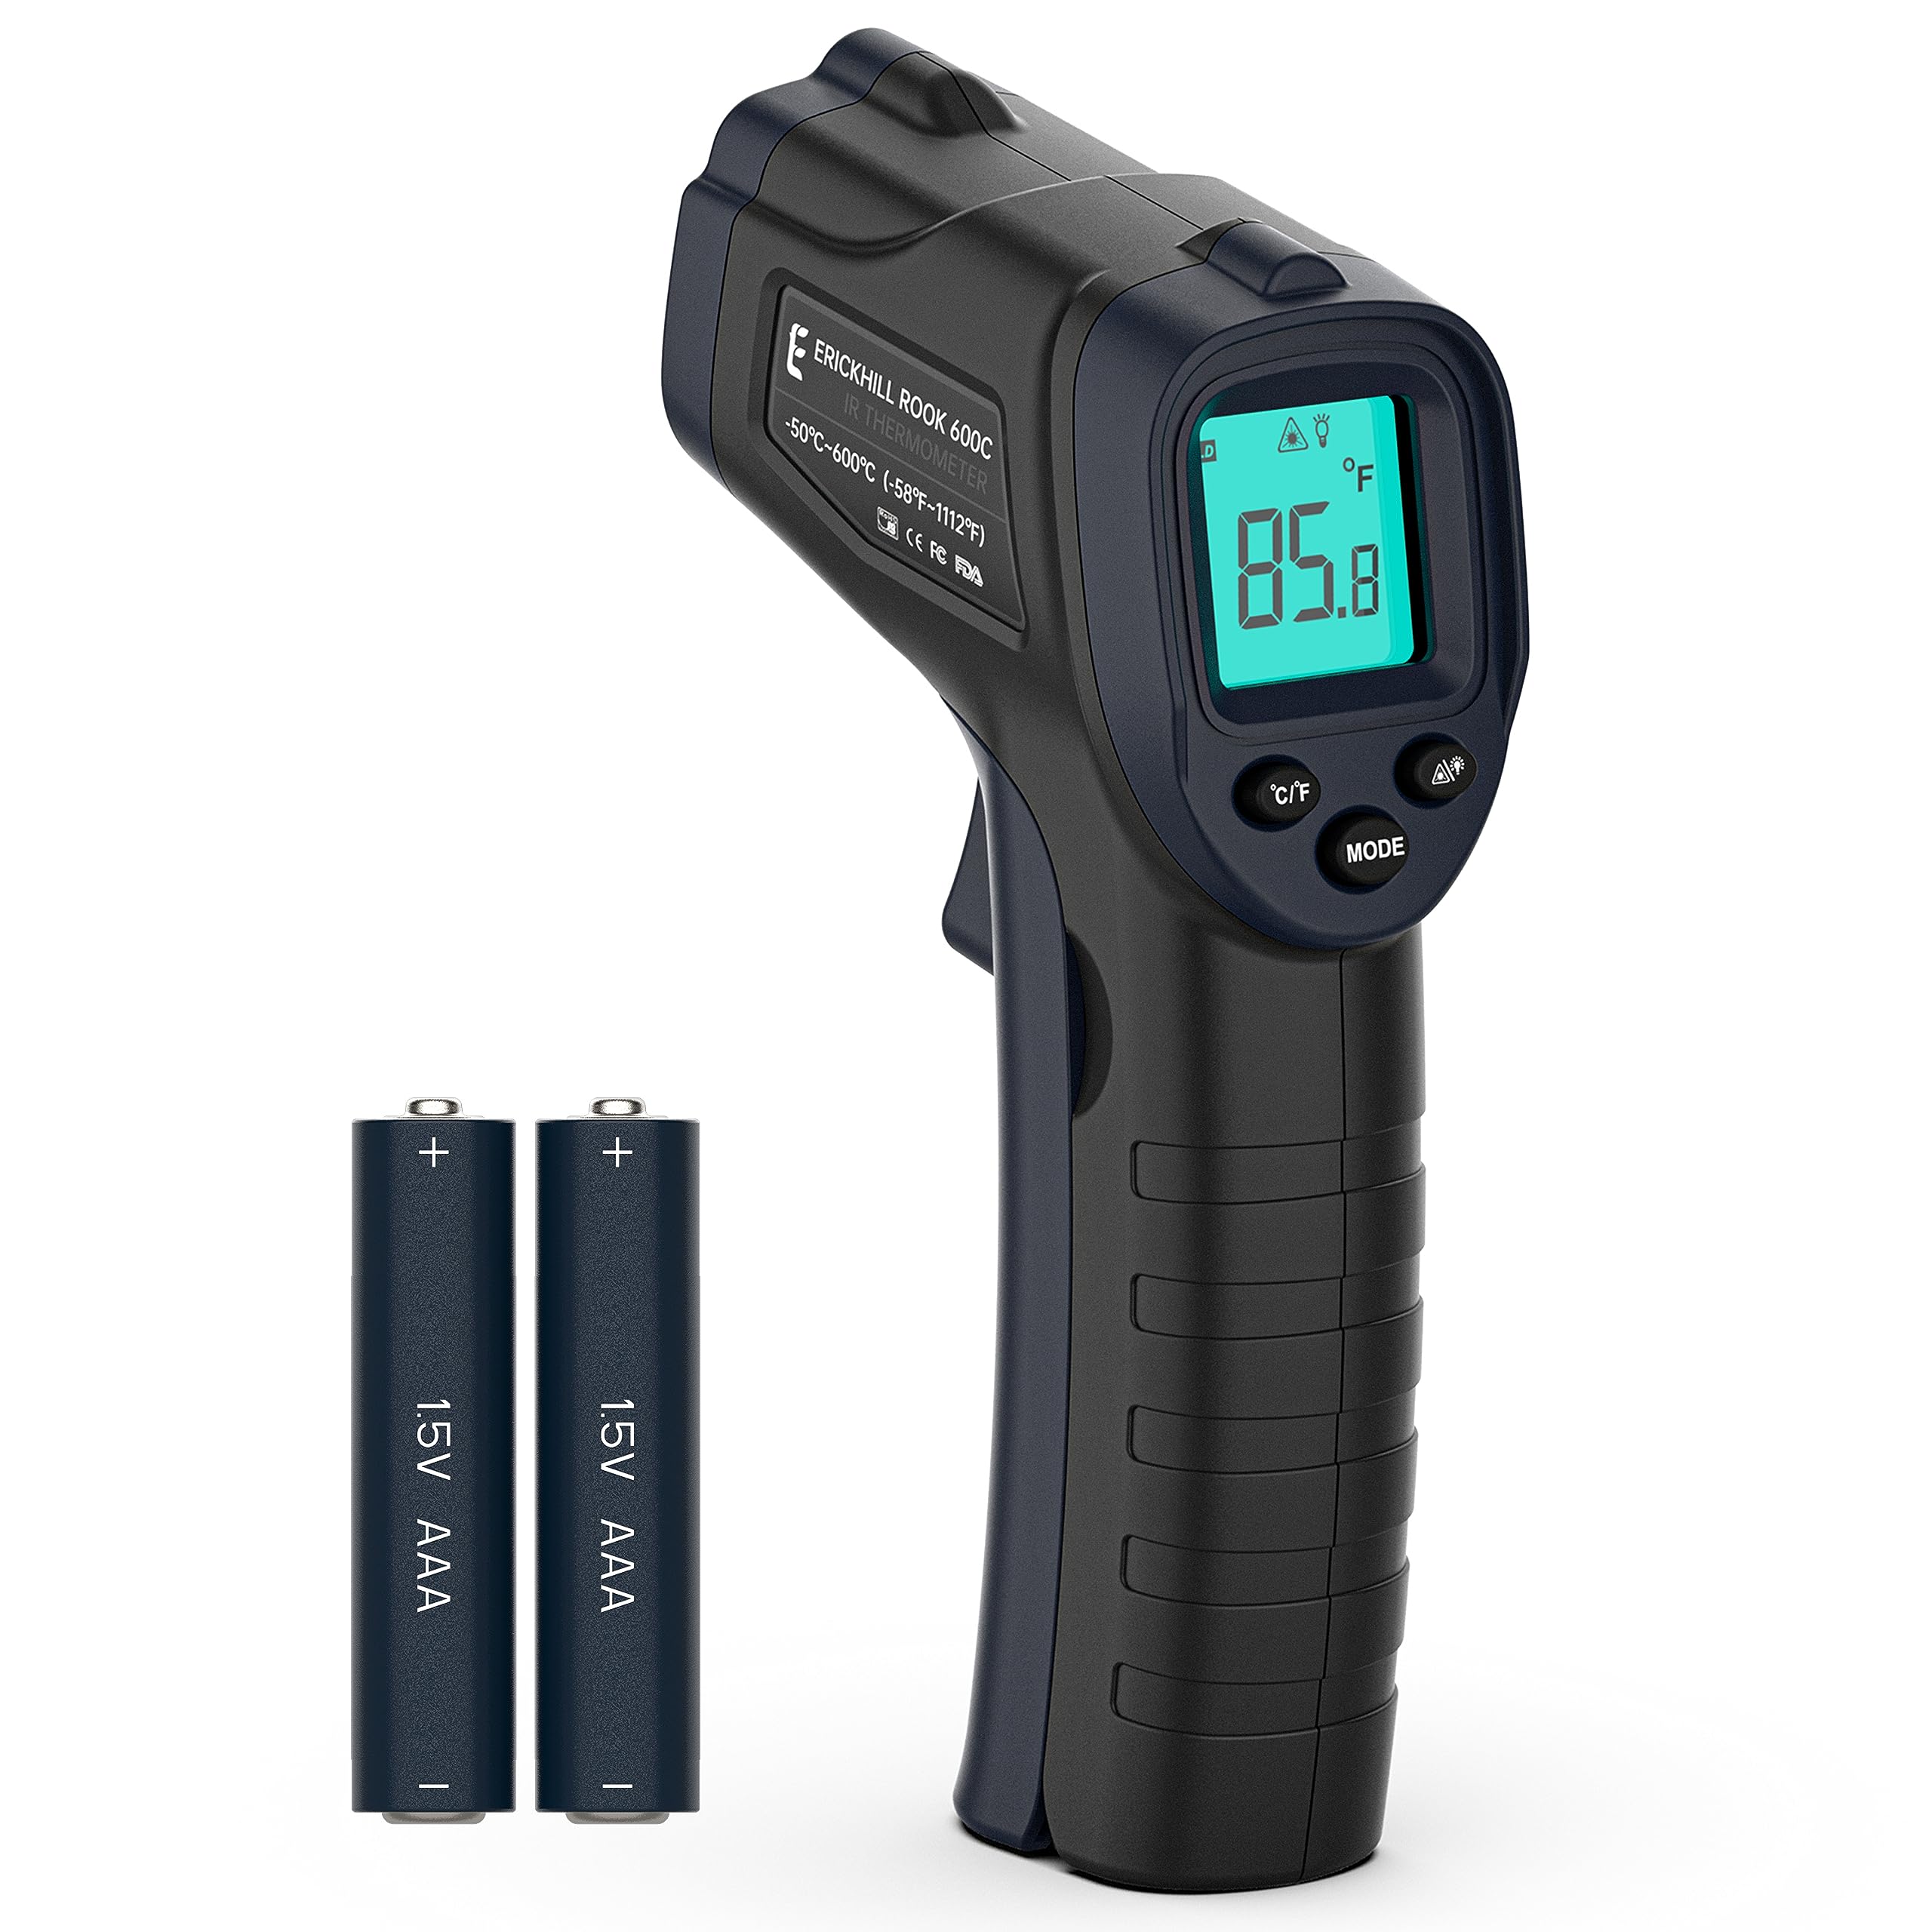 ERICKHILL ROOK 600C Infrared Thermometer -58°F~1112°F, Laser Temperature for Cooking, Temp Gun with Adjustable Emissivity, Suitable for BBQ, Griddle, Pizza Oven, HVAC, Engine, Pool